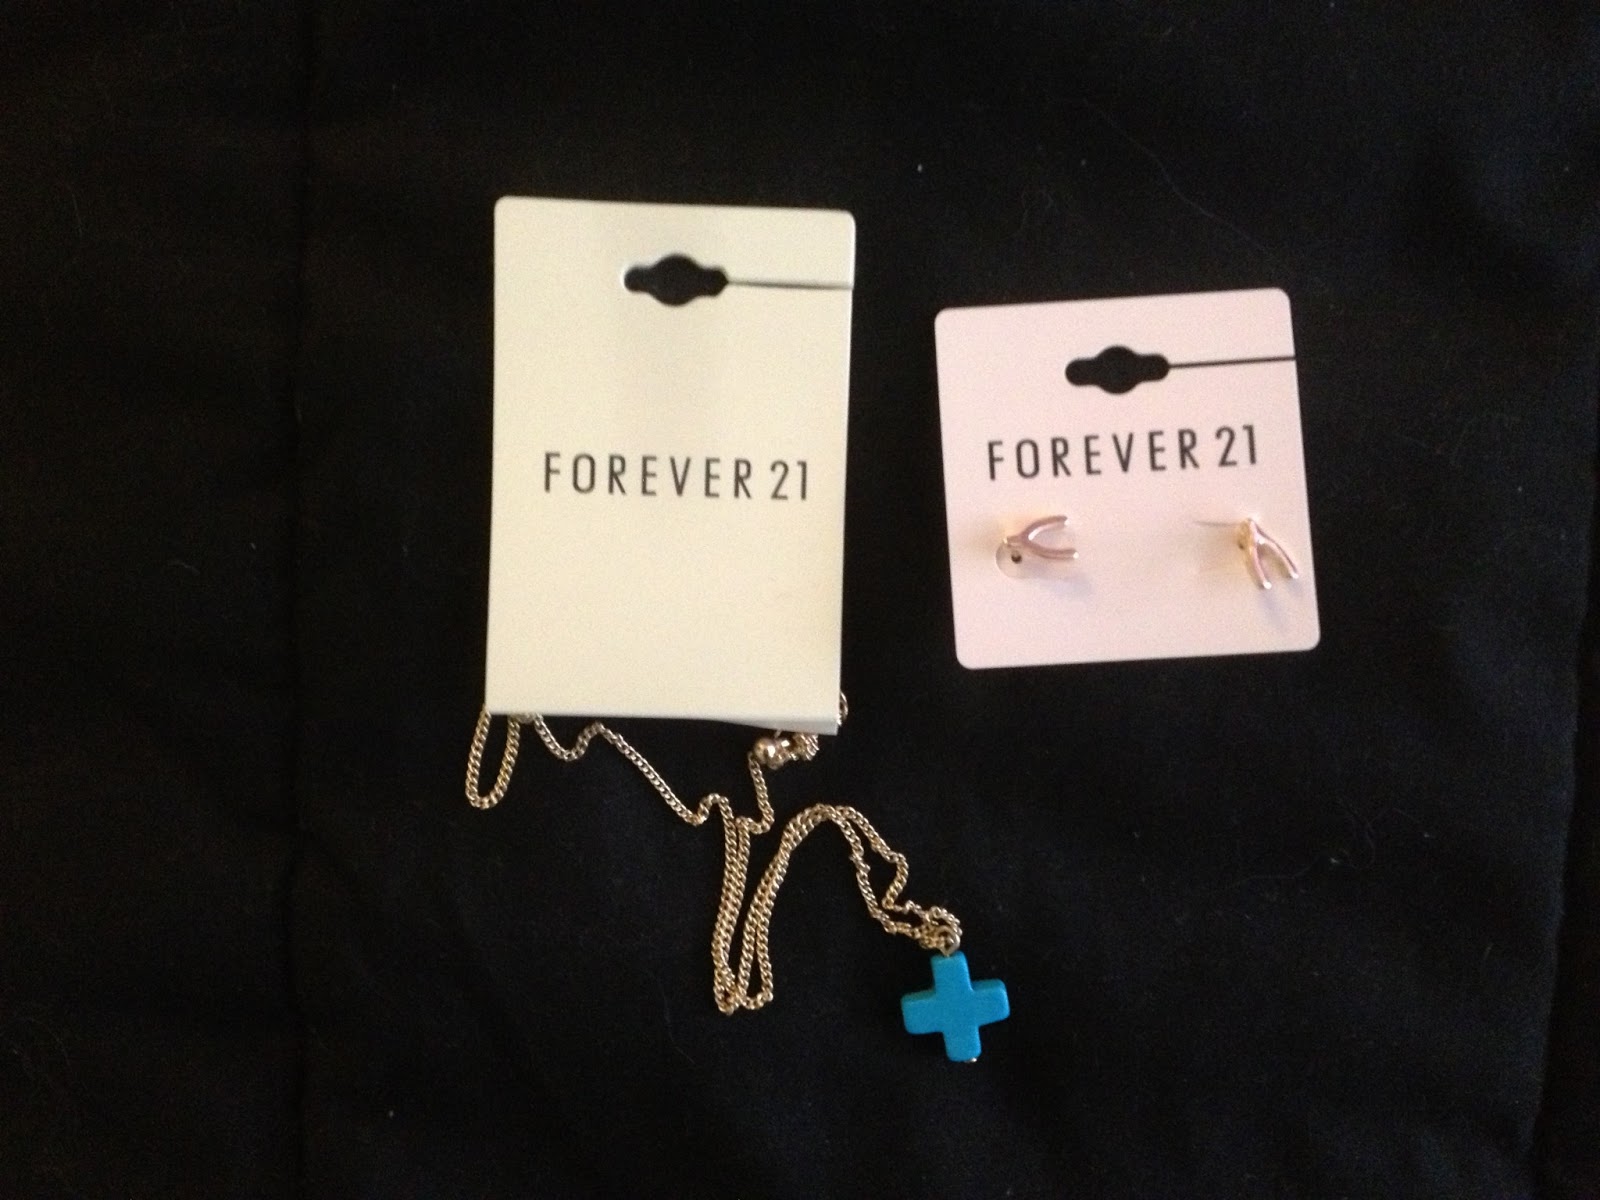 Jaws tank top, blue plus necklace and wishbone studs-Forever 21